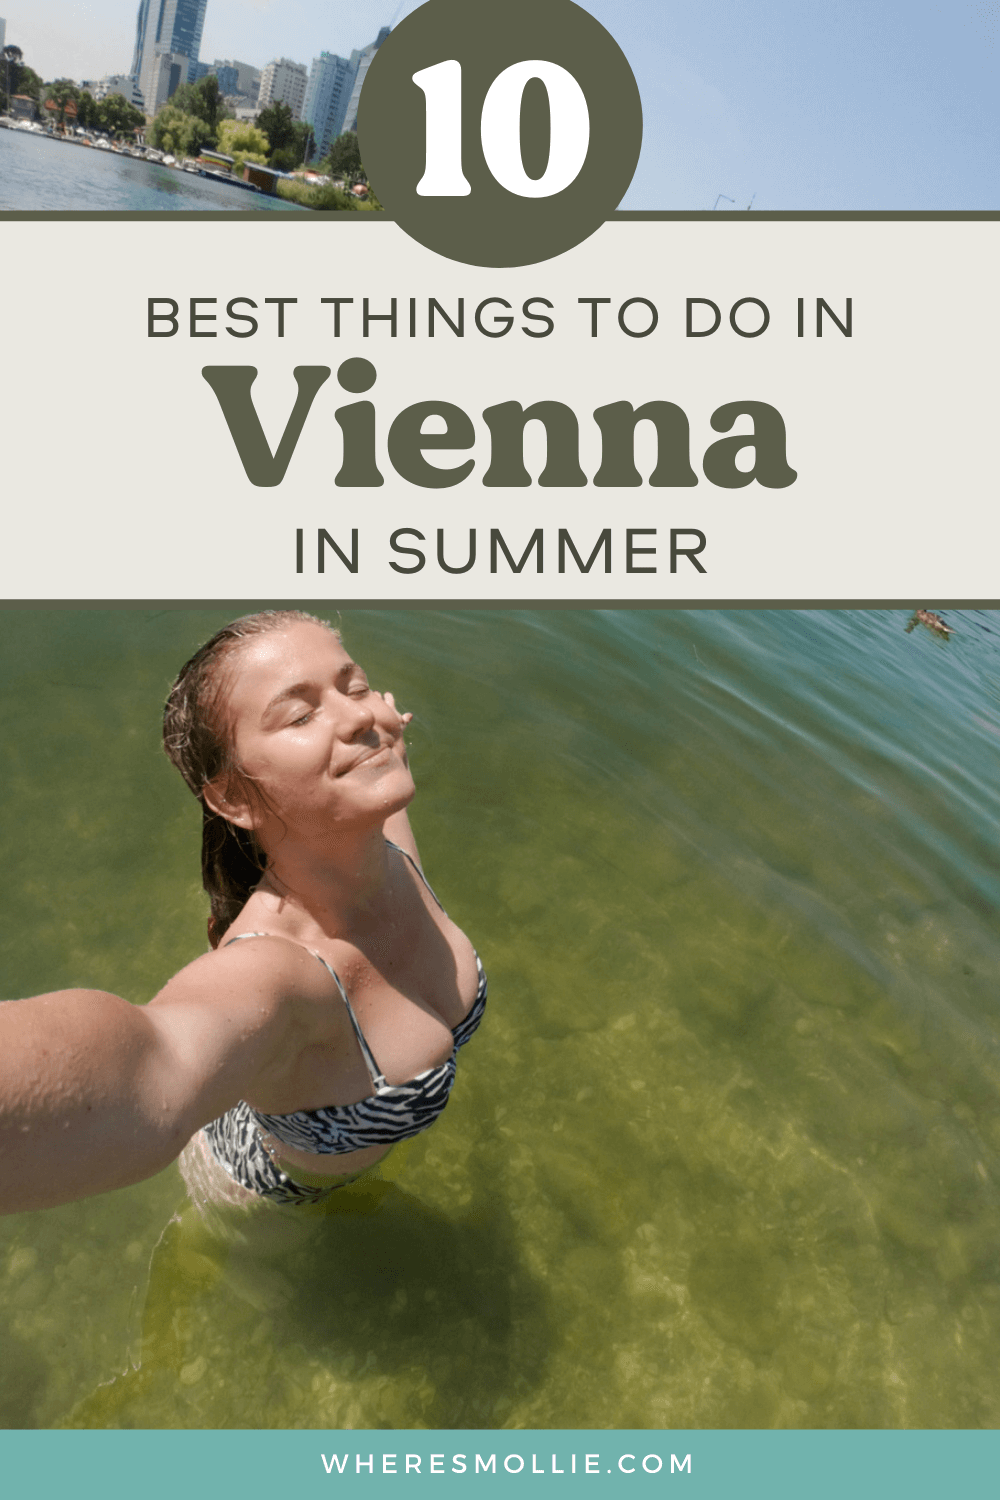 The best things to do in Vienna in summer